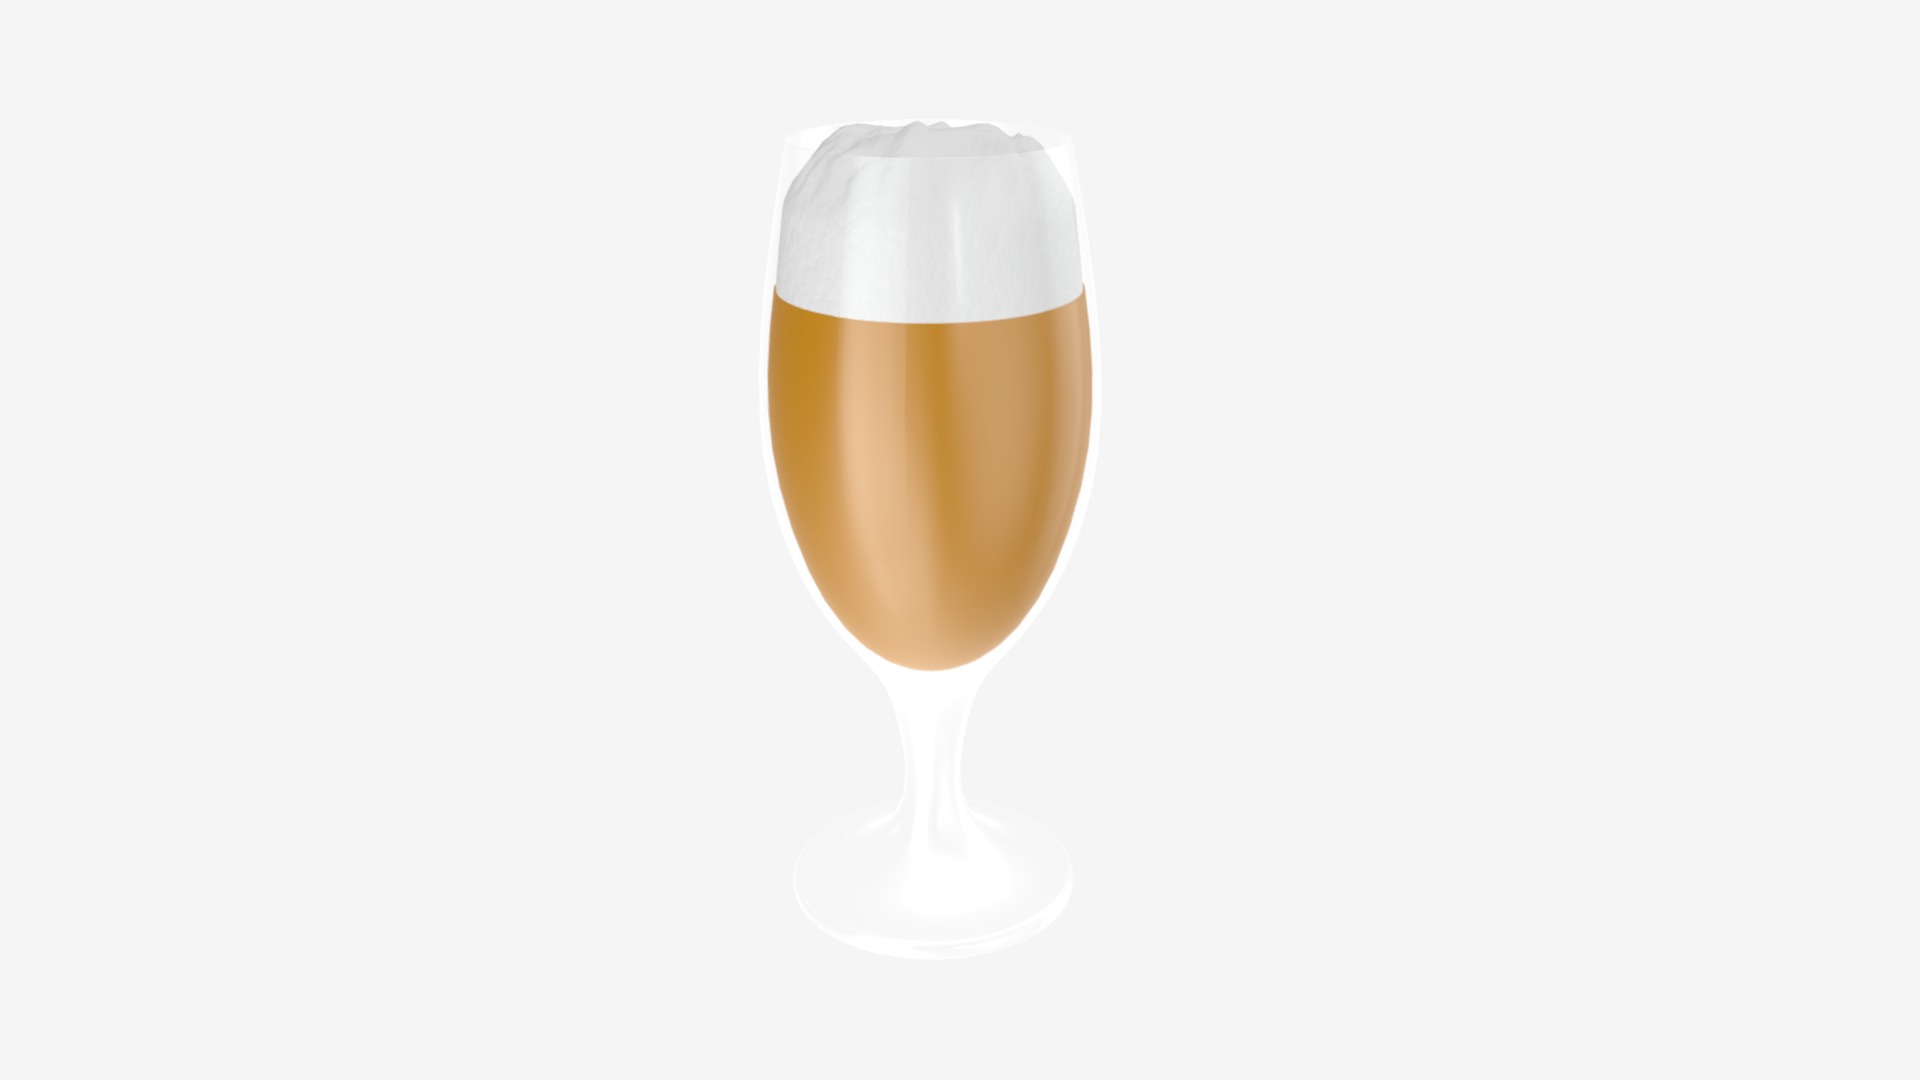 3D model beer pint with foam - This is a 3D model of the beer pint with foam. The 3D model is about a glass of beer.